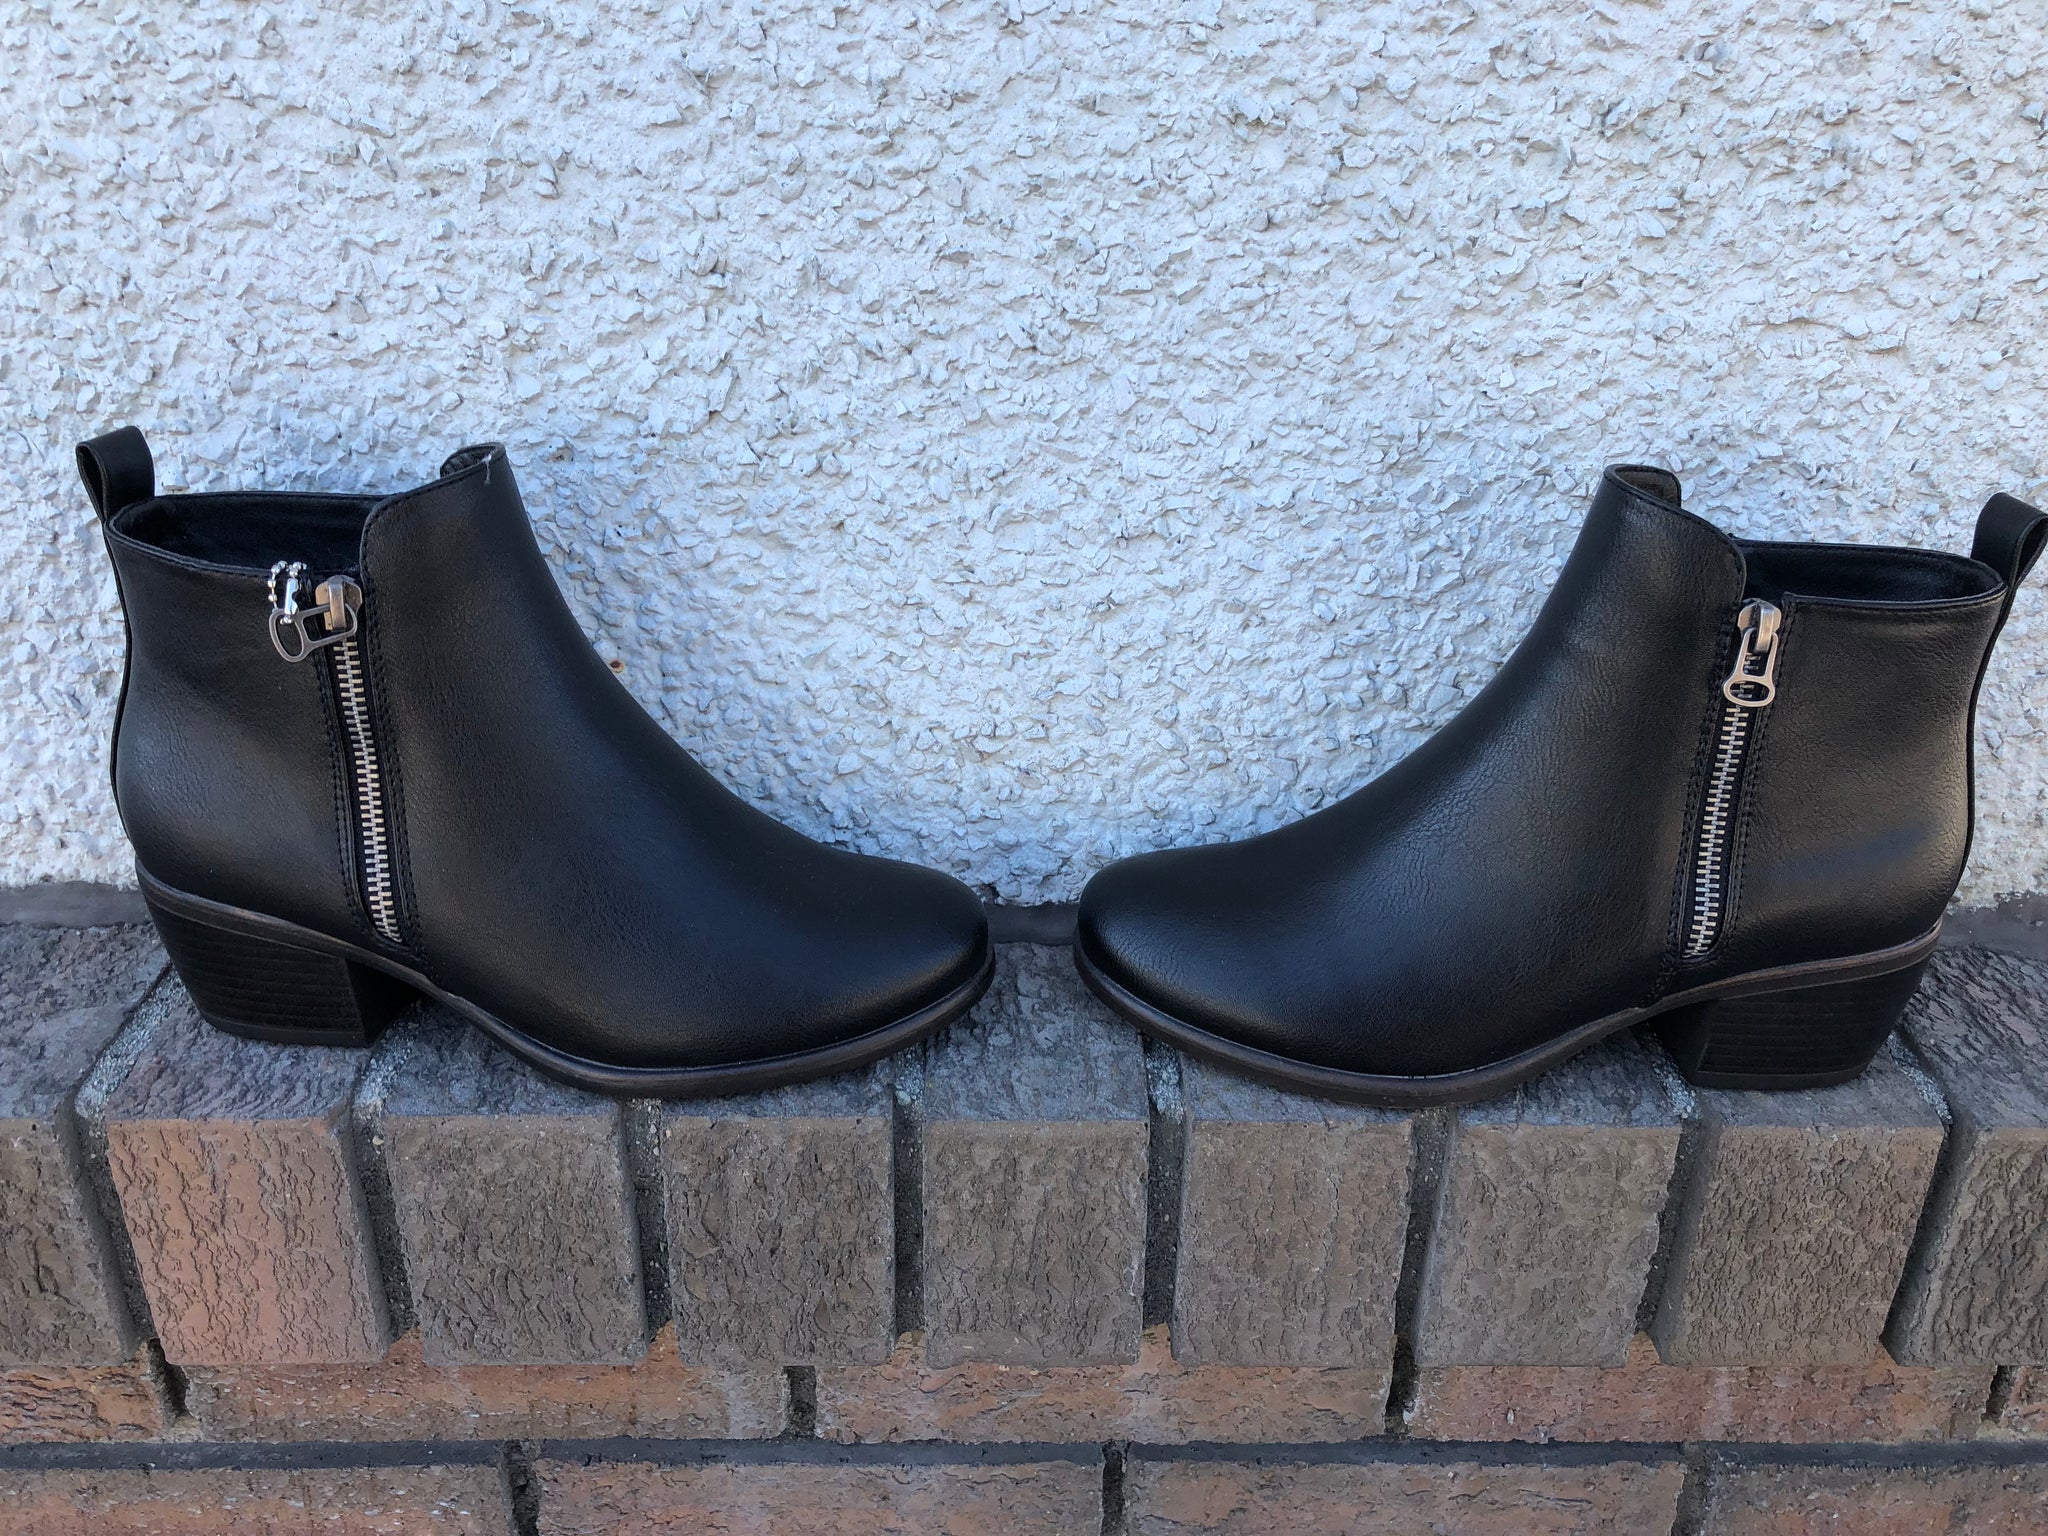 Hailey Black Ankle Boot: Waterproof, BUY ONLINE, Fits to a T